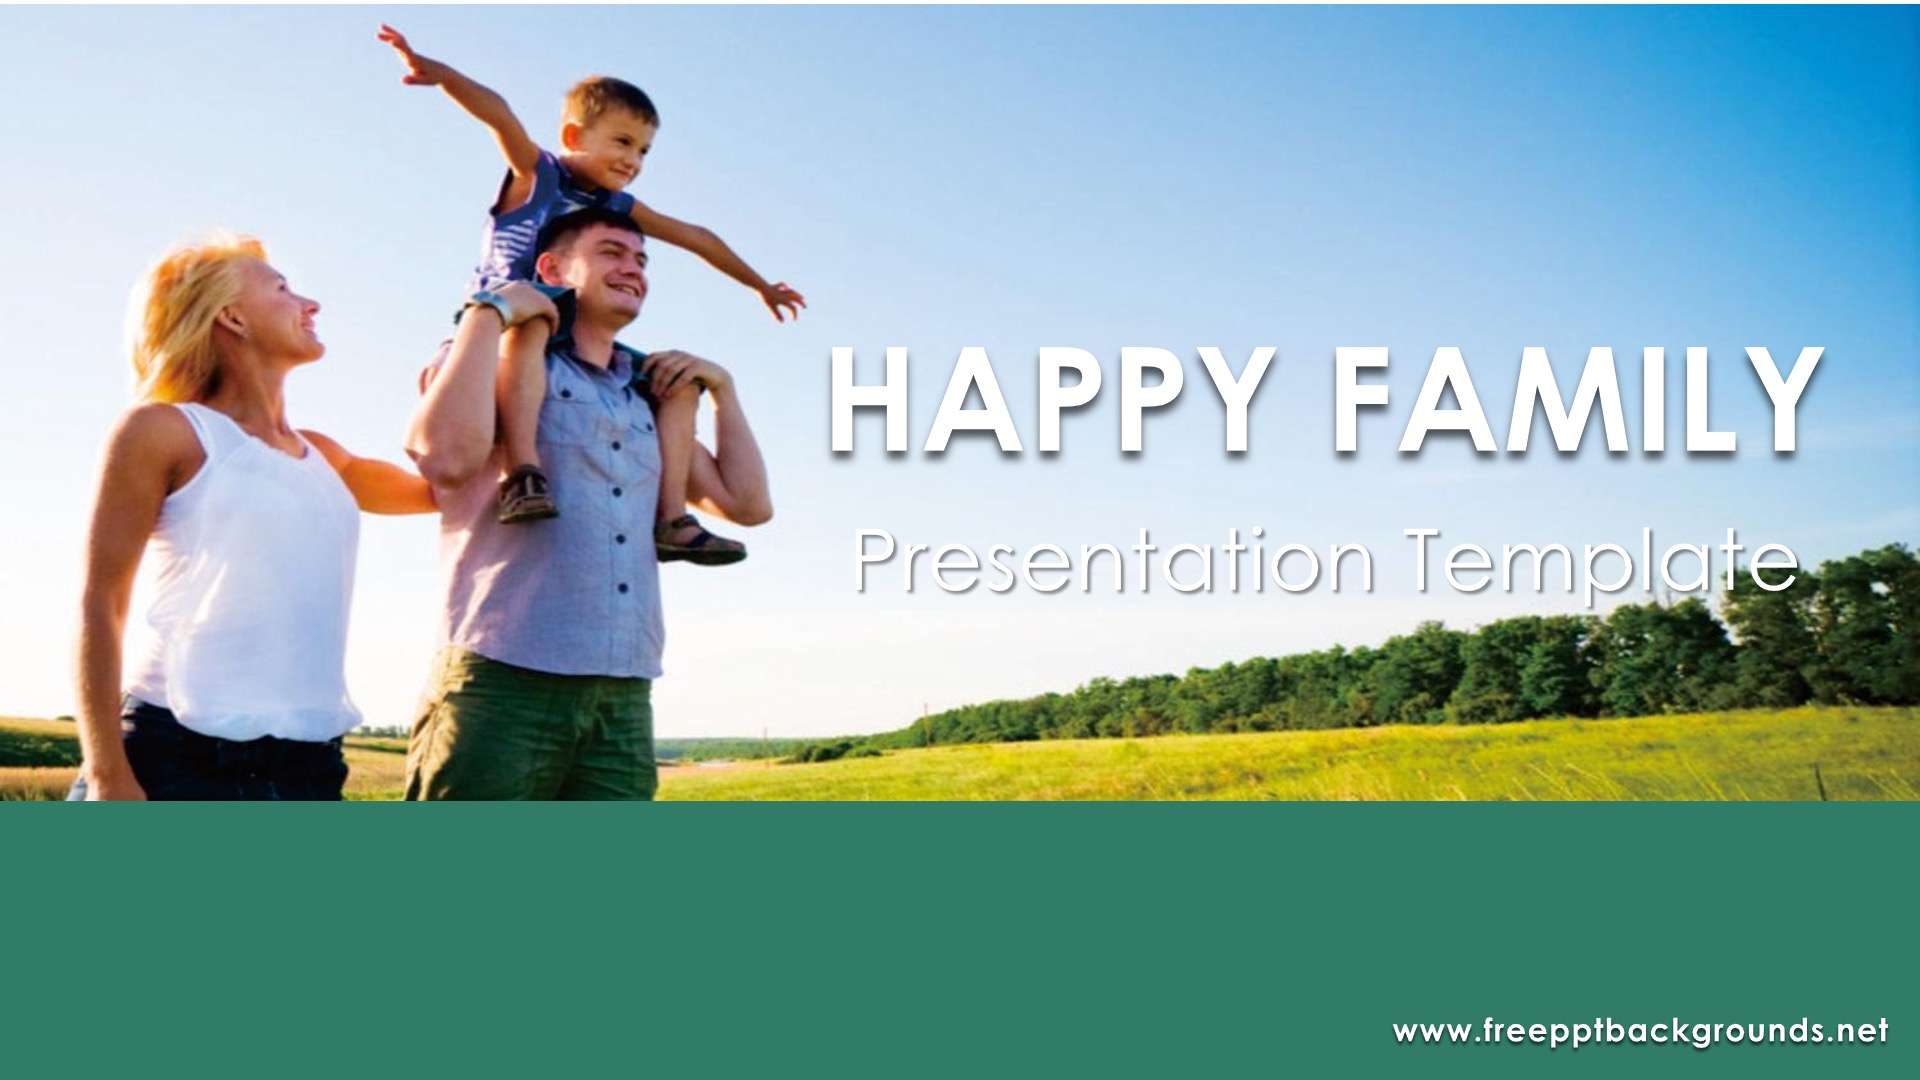 Happy Family Background Template - Free PPT Backgrounds and Templates